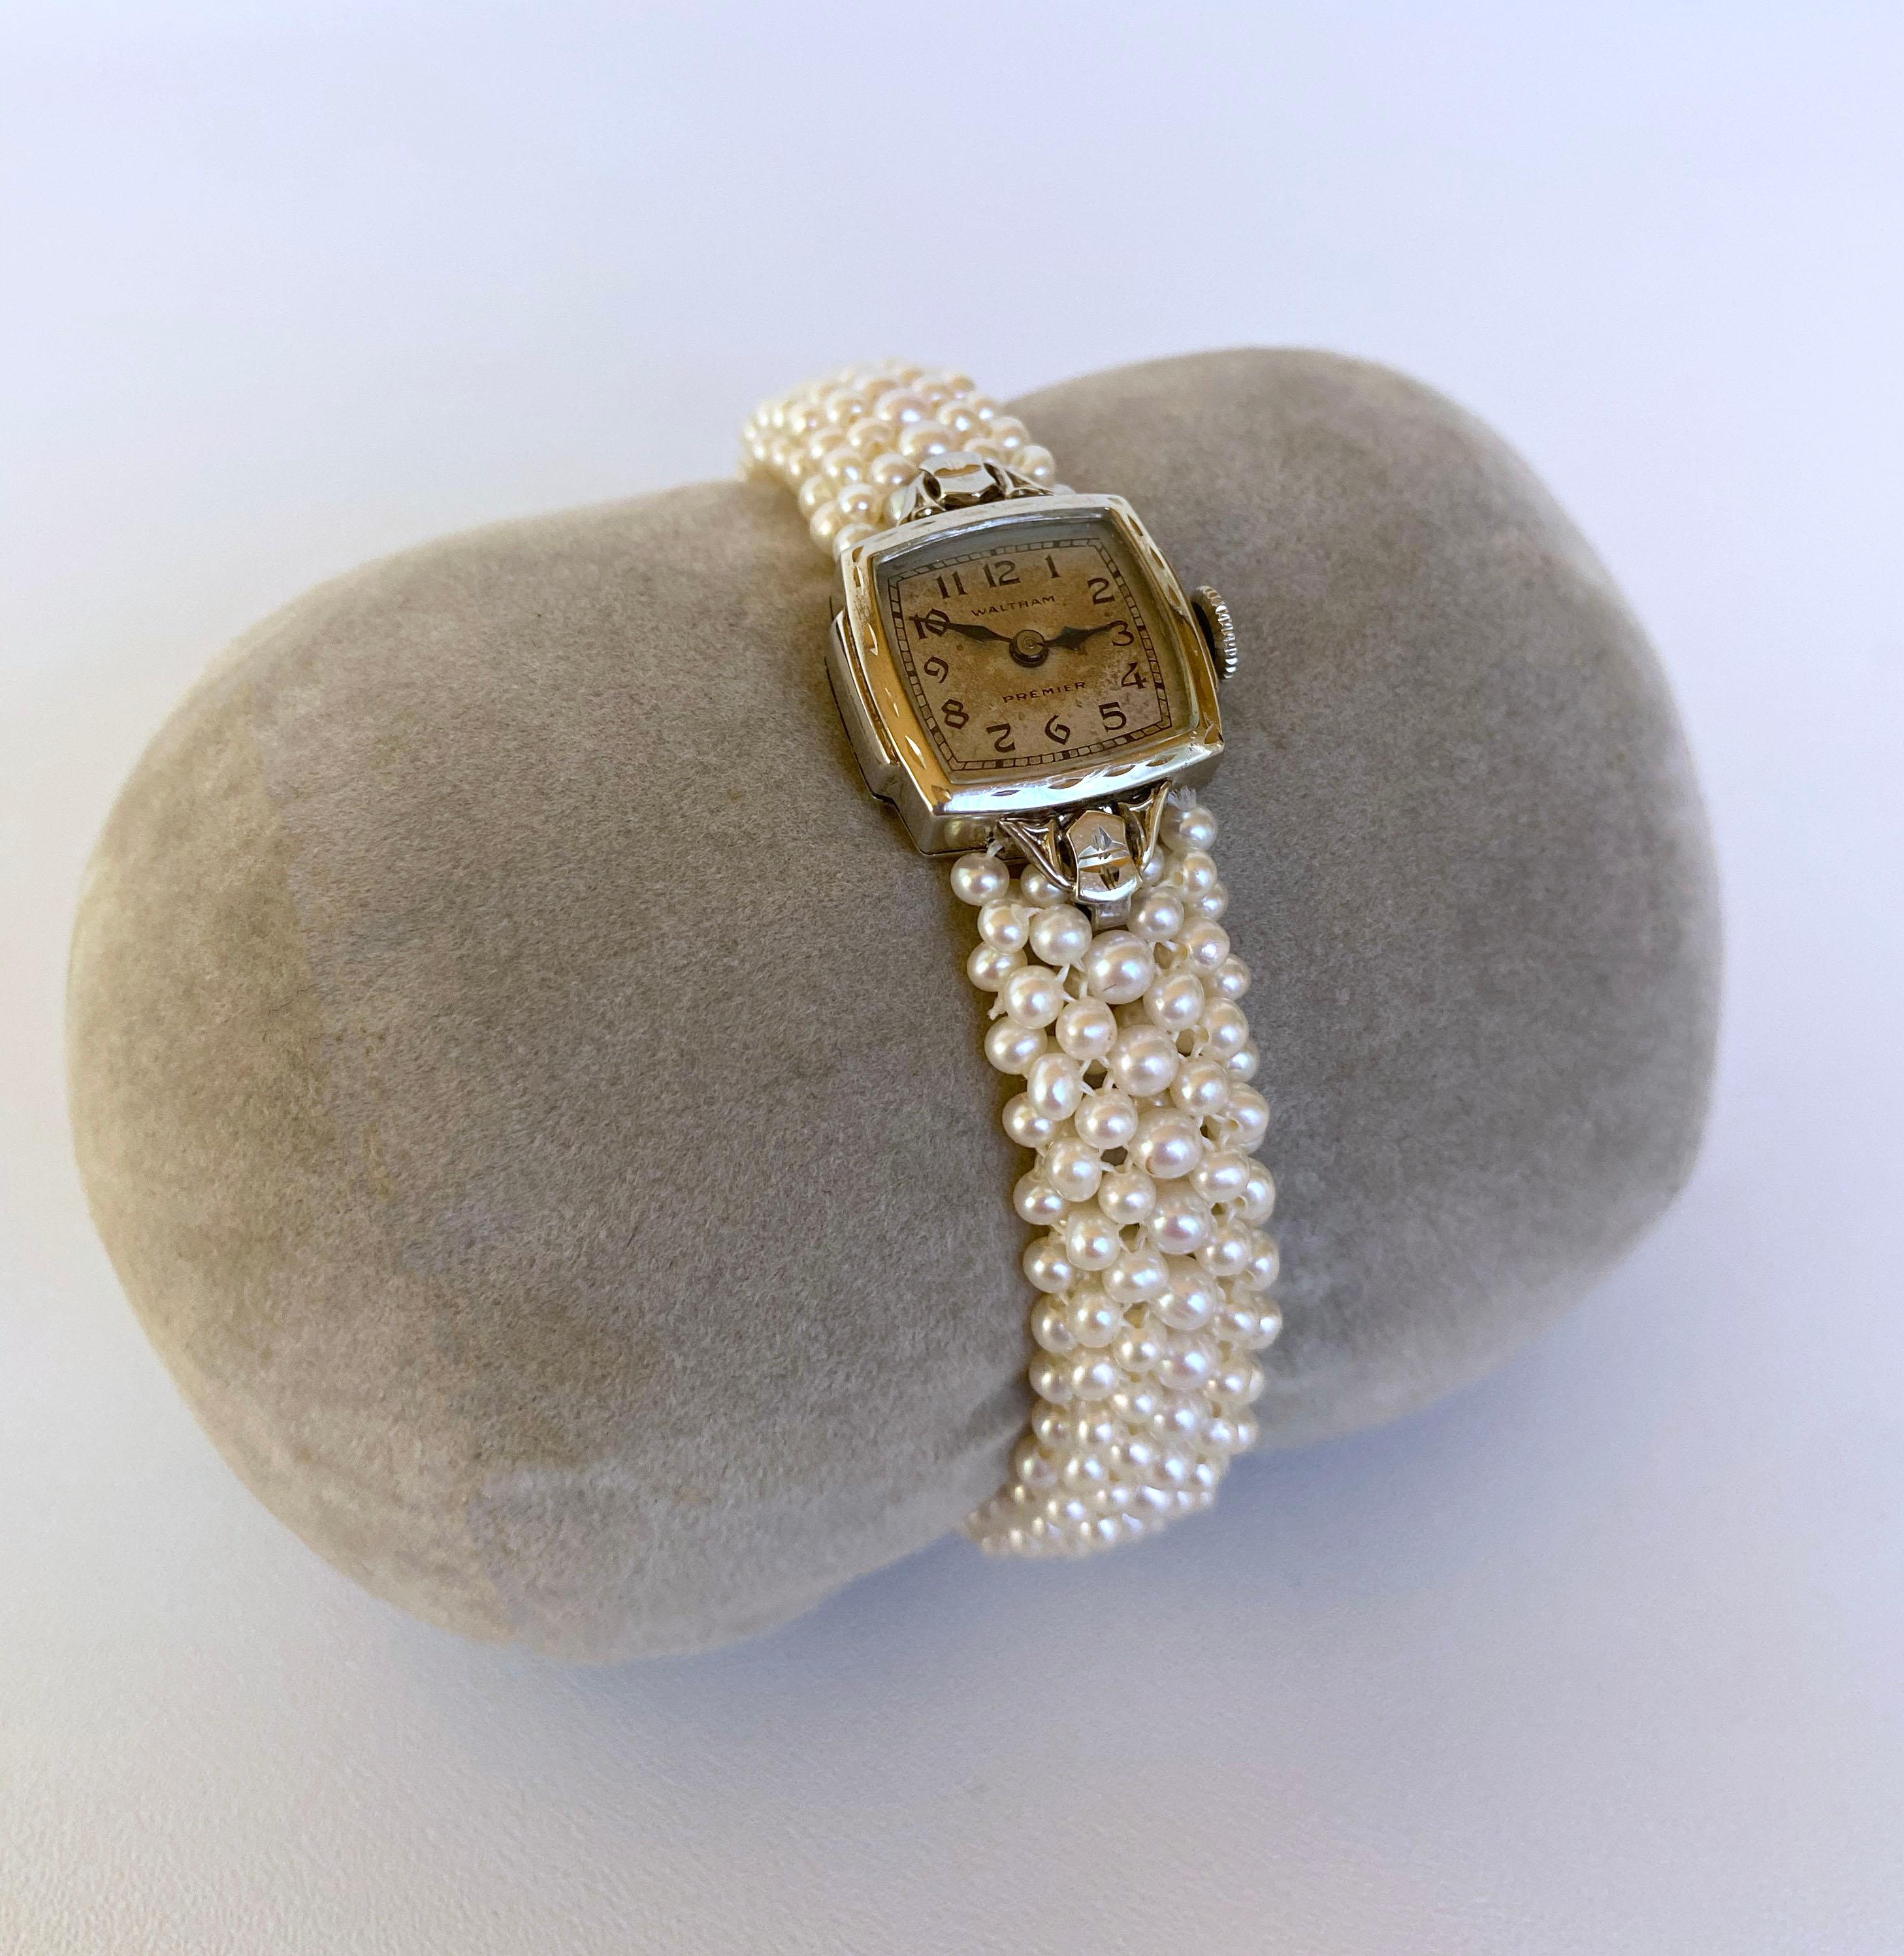 Bead Marina J Woven Pearl  Bracelet with Vintage 14k White Gold working manual Watch 